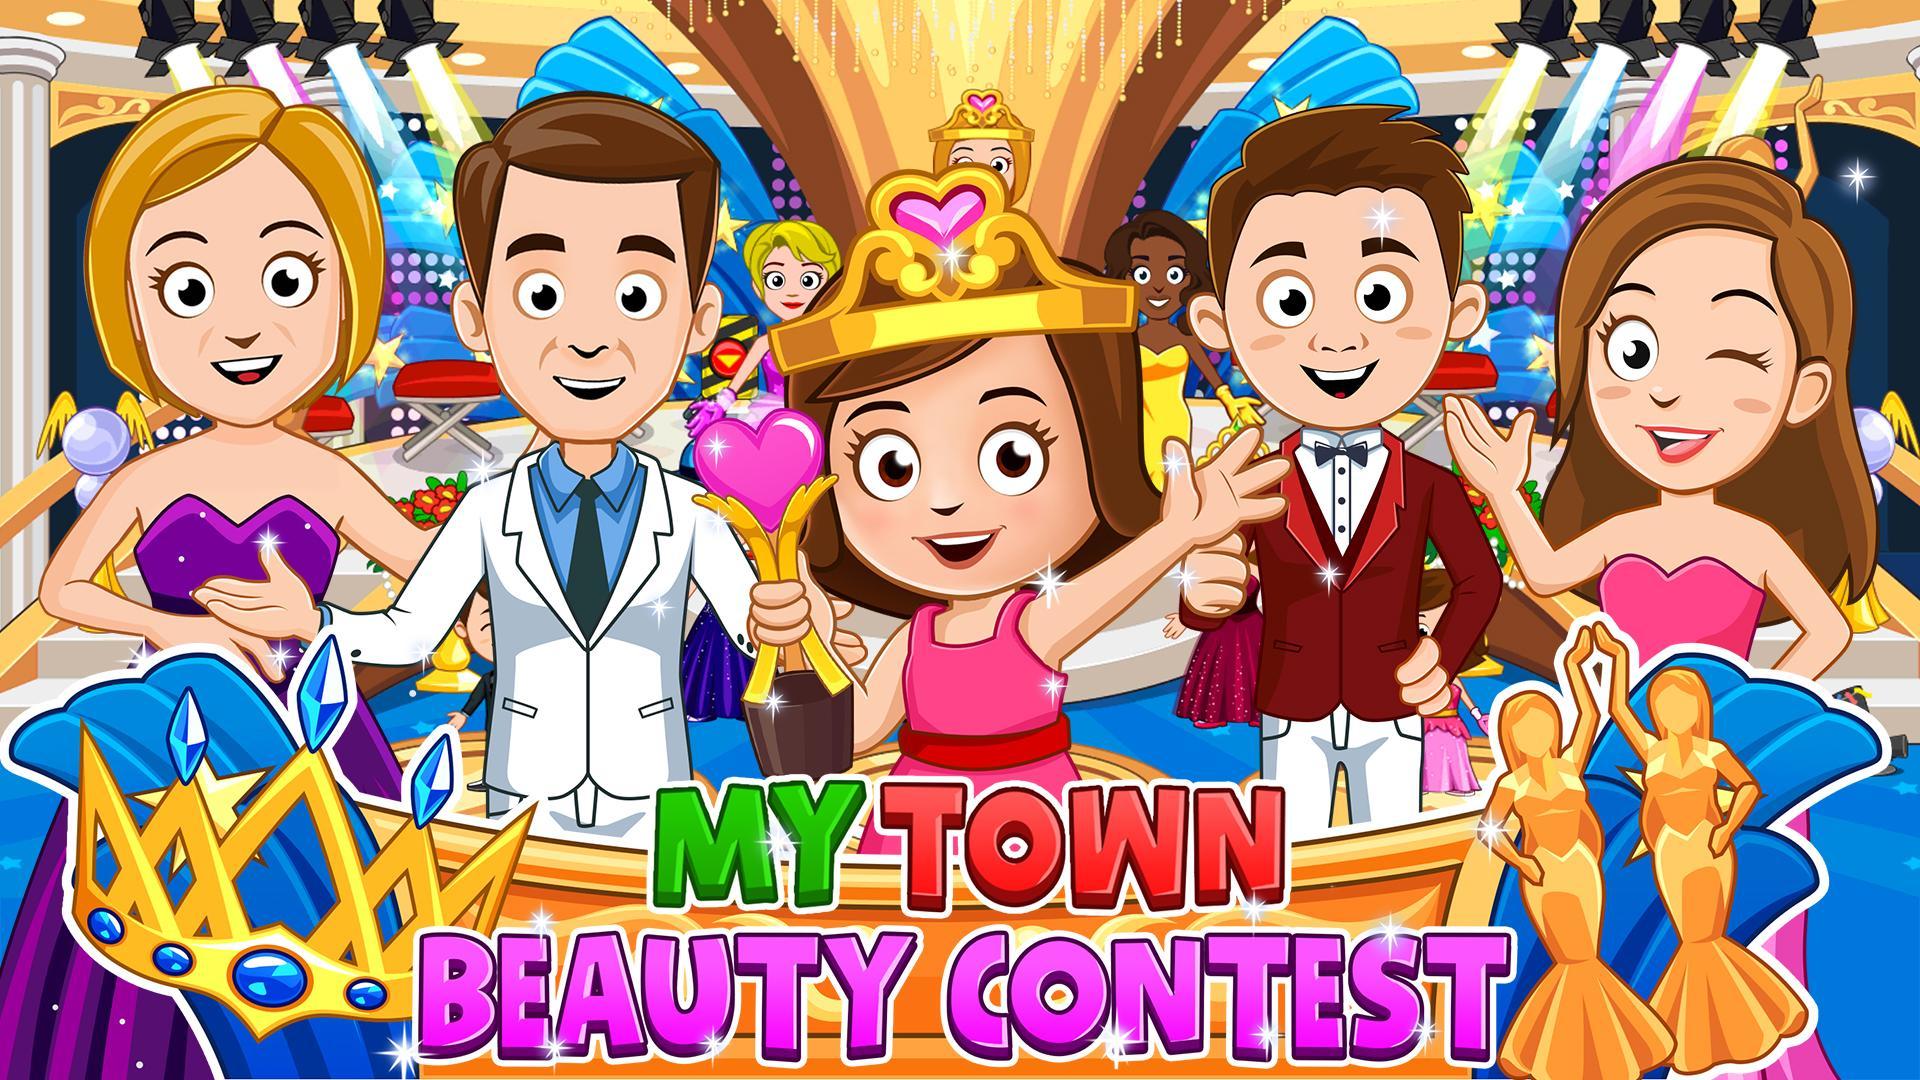 Screenshot 1 of My Town : Beauty contest 7.00.15